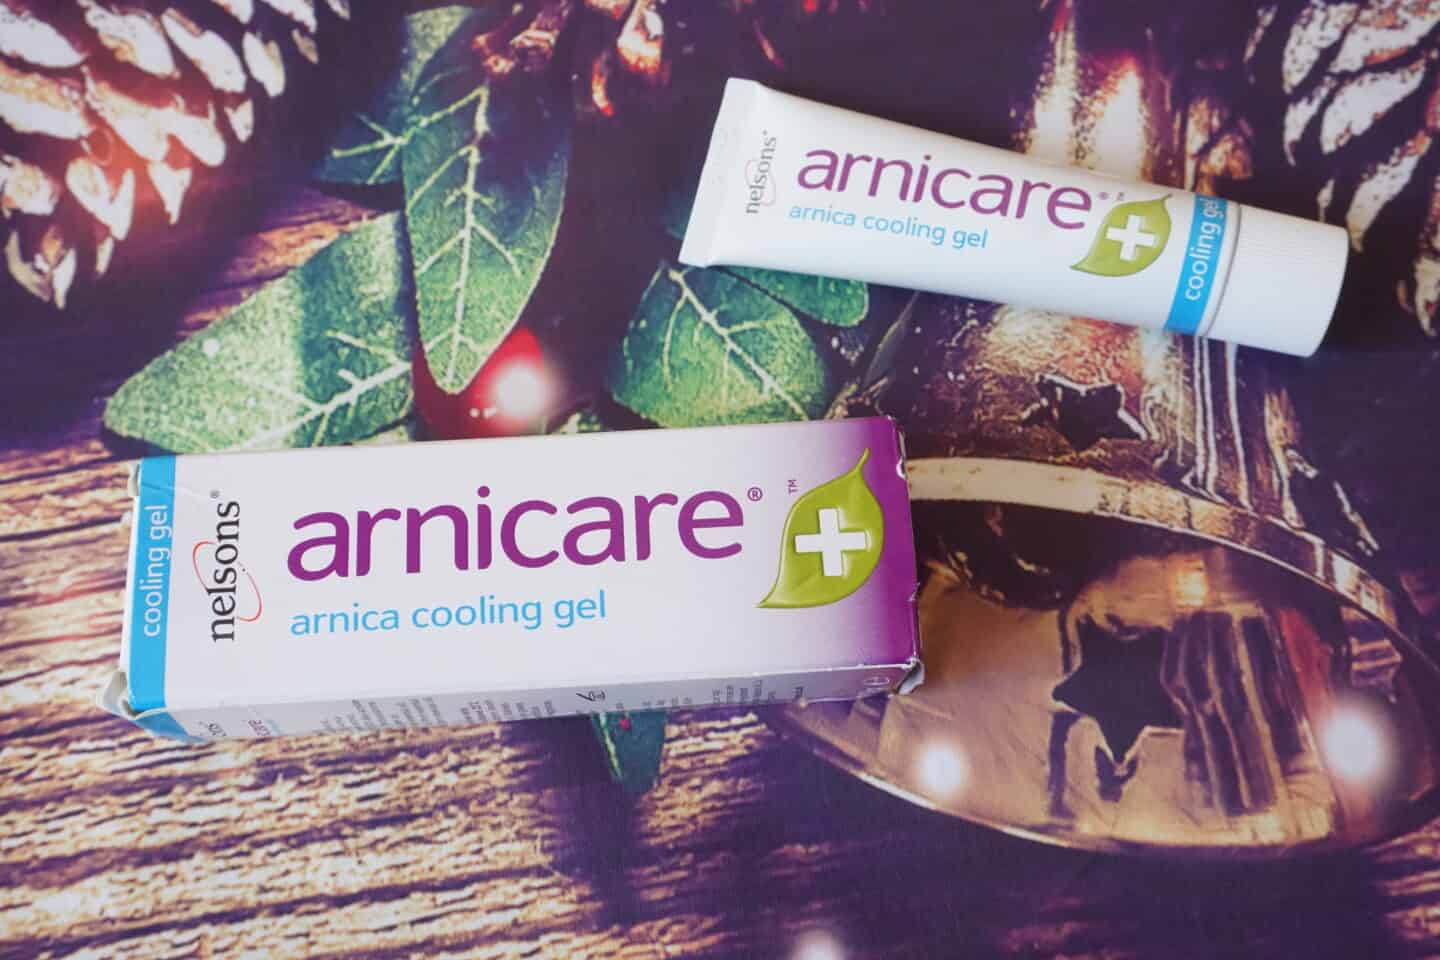 Arnicare cooling gel on a festive background ready to go in a virtual run goodie bag